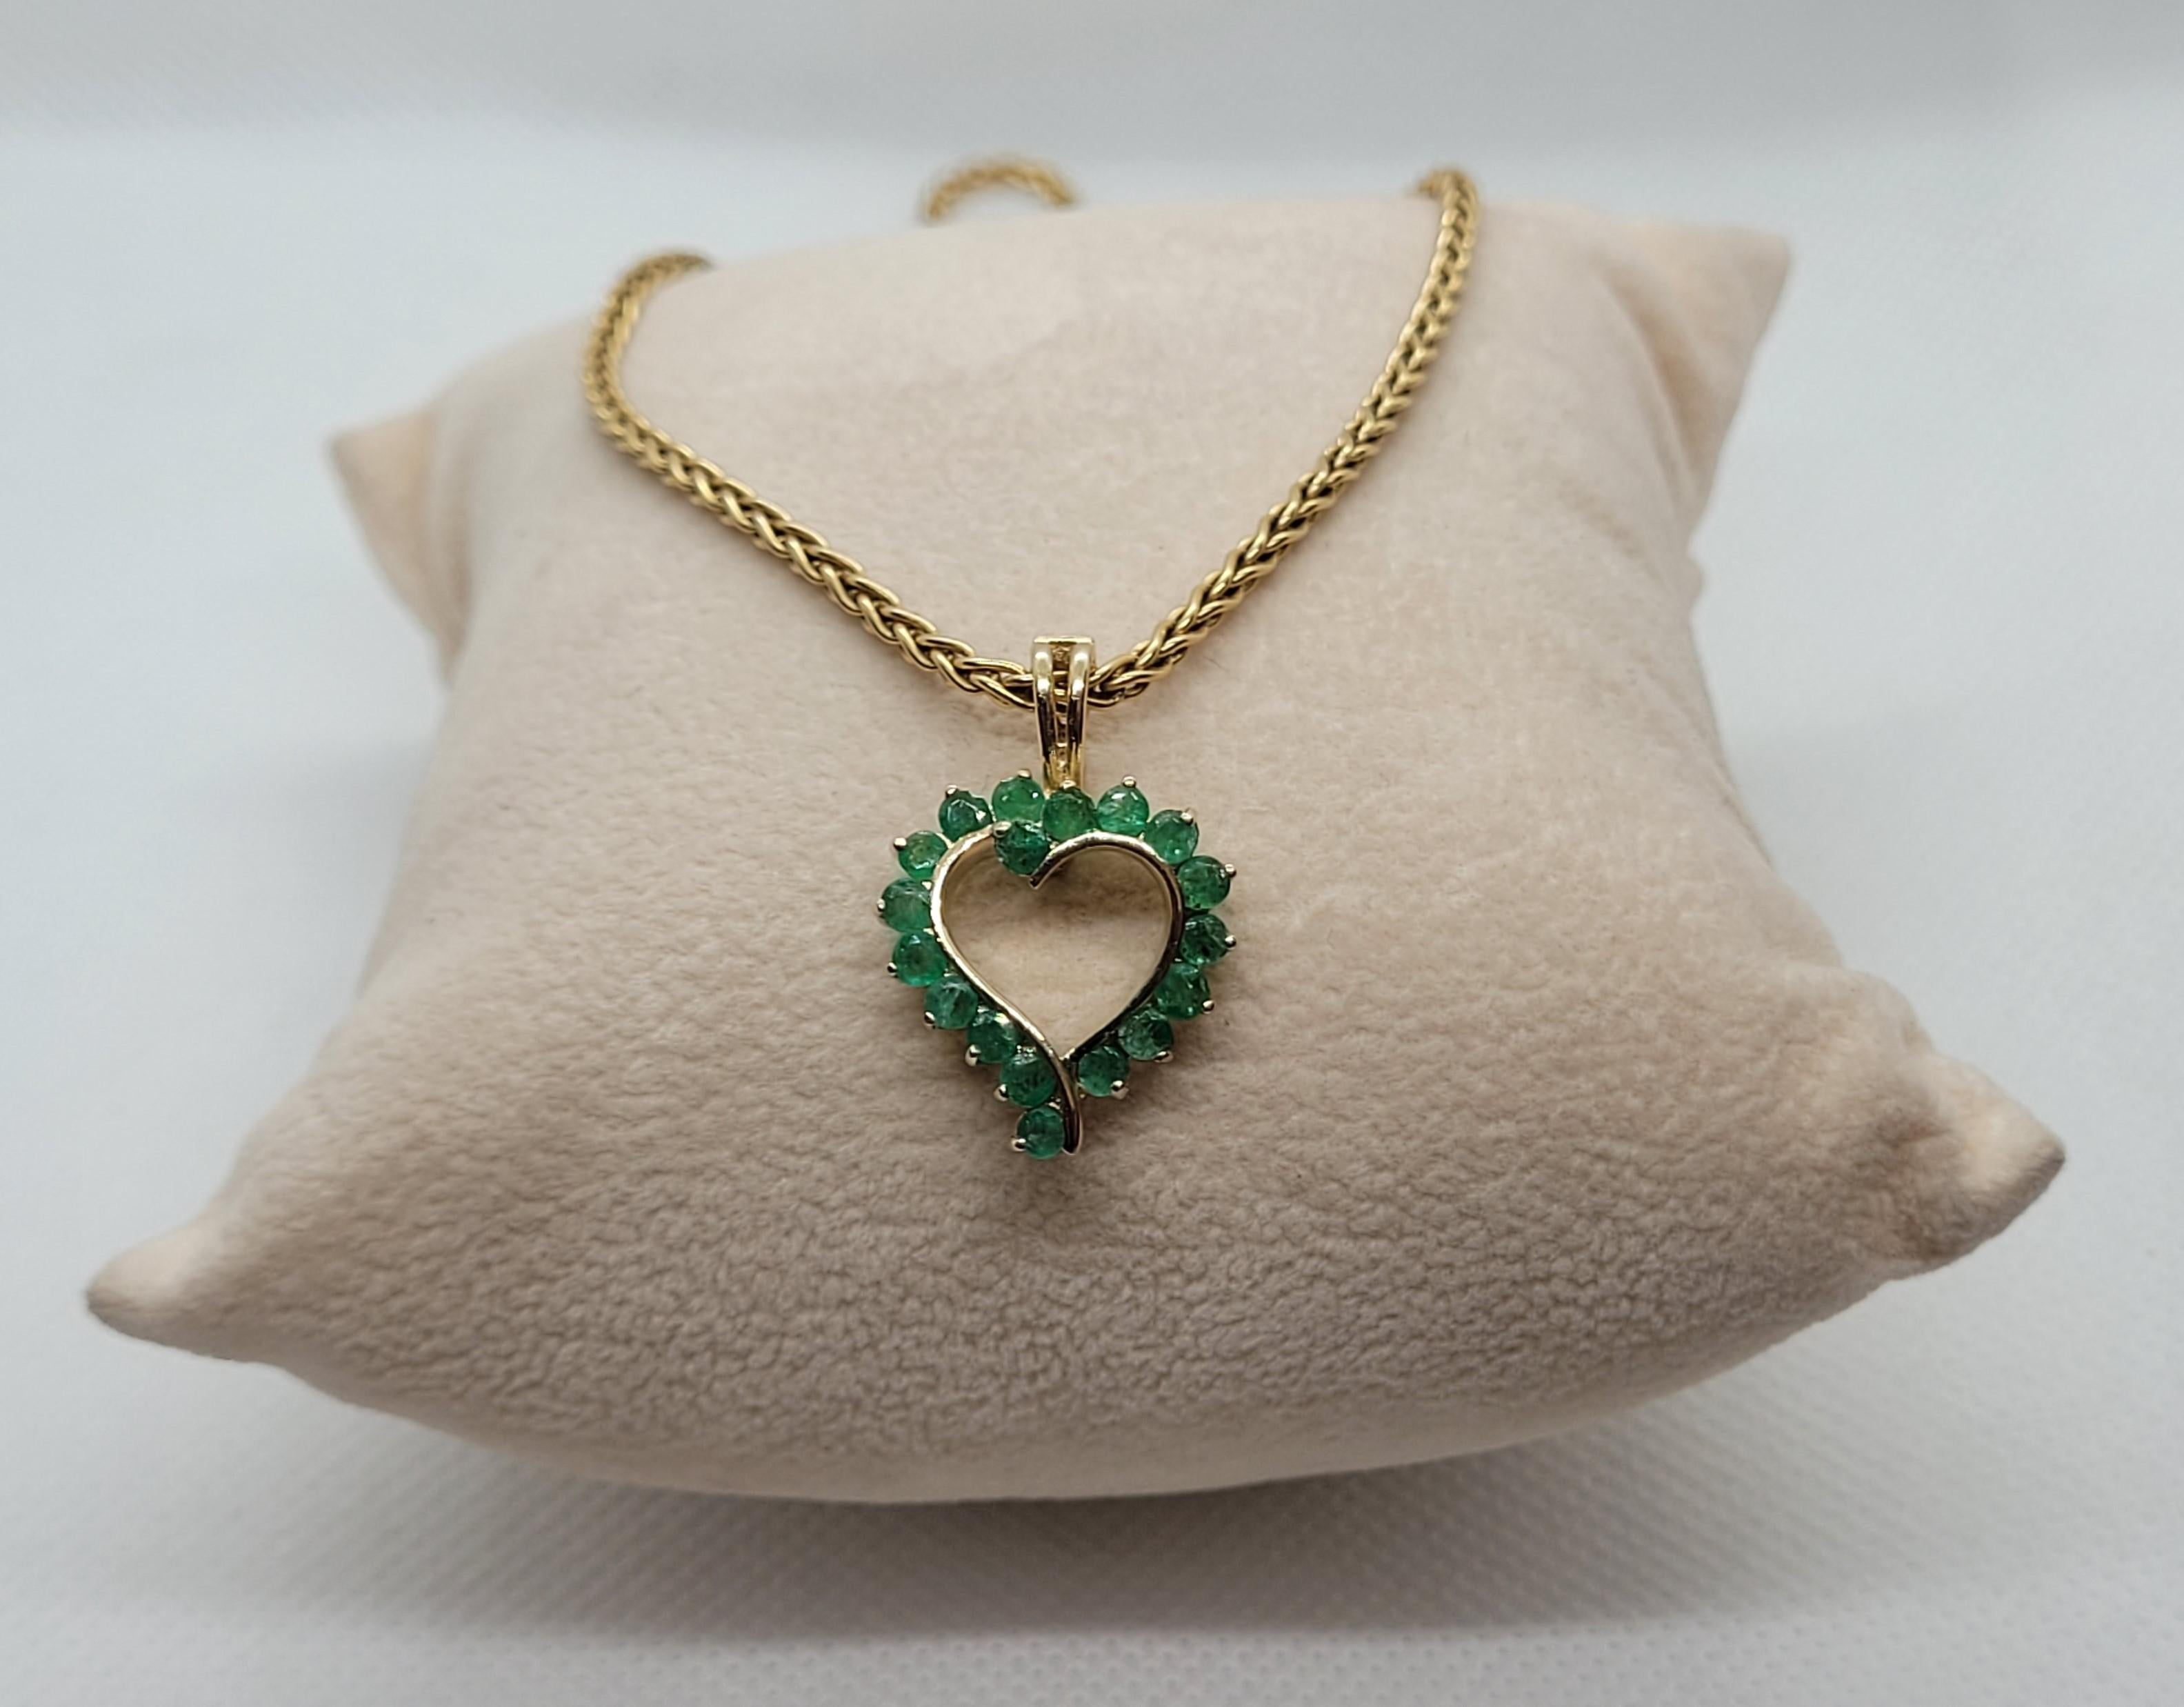 Lovely 14kt yellow gold heart pendant with 18 round emeralds of approximately 1.40cttw. The pendant is 23mm long by 17mm wide, stamped 585 14kt, with prong set emeralds that are 2.4mm in size, medium commercial grade quality, visible inclusions, and